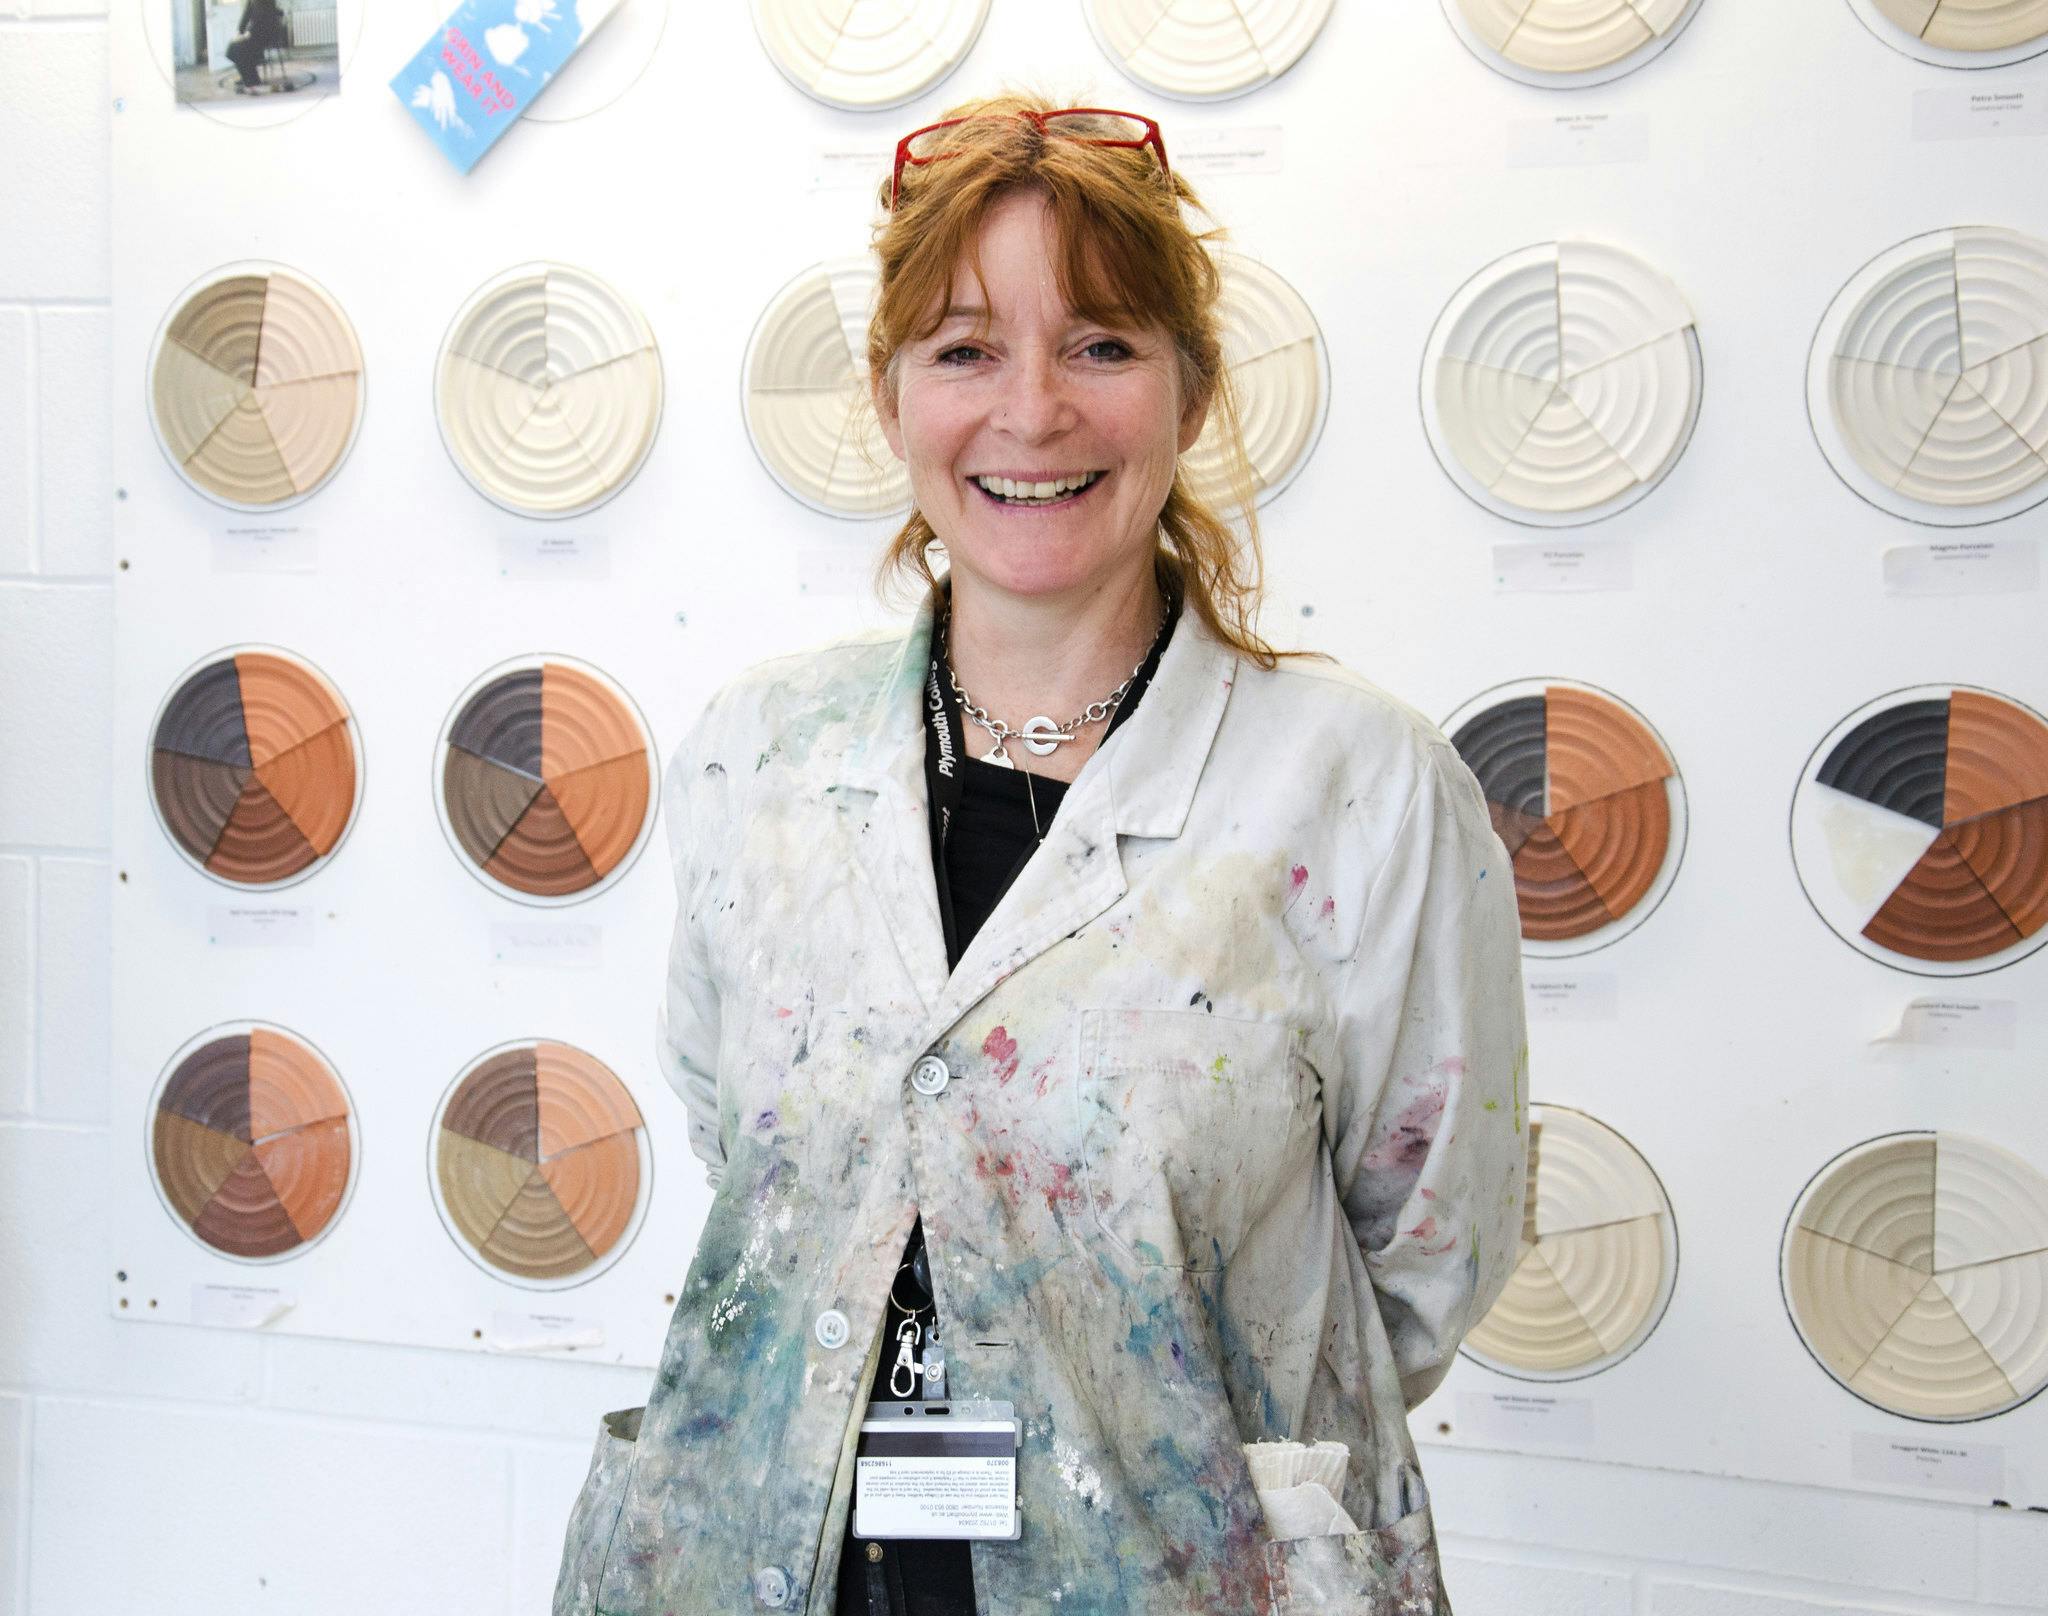 Crafts student Jo Tyler smiles at the camera in our ceramics studios with a wall of test tiles behind her